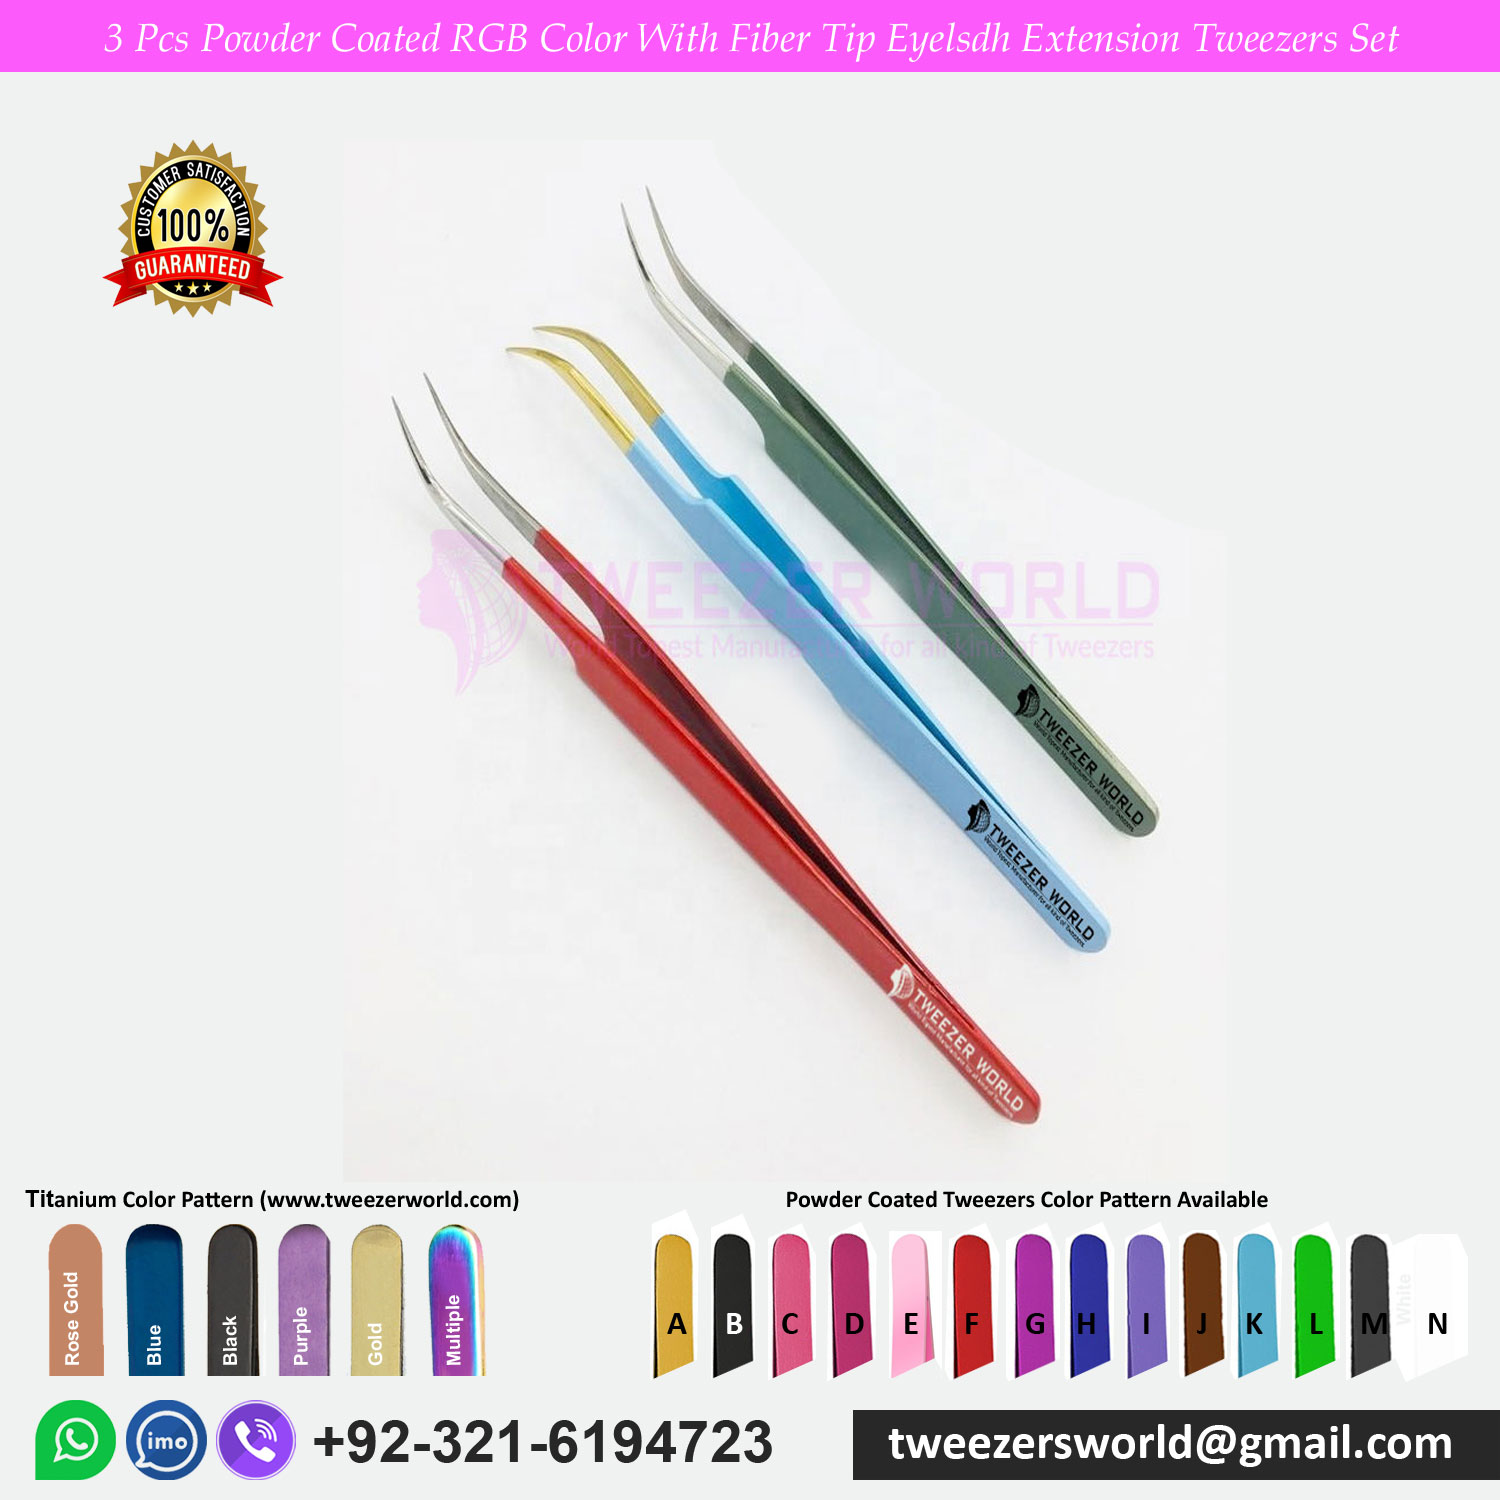 3 Pcs Powder Coated RGB Color With Fiber Tip Eyelash Extension Tweezers Set For professional Used